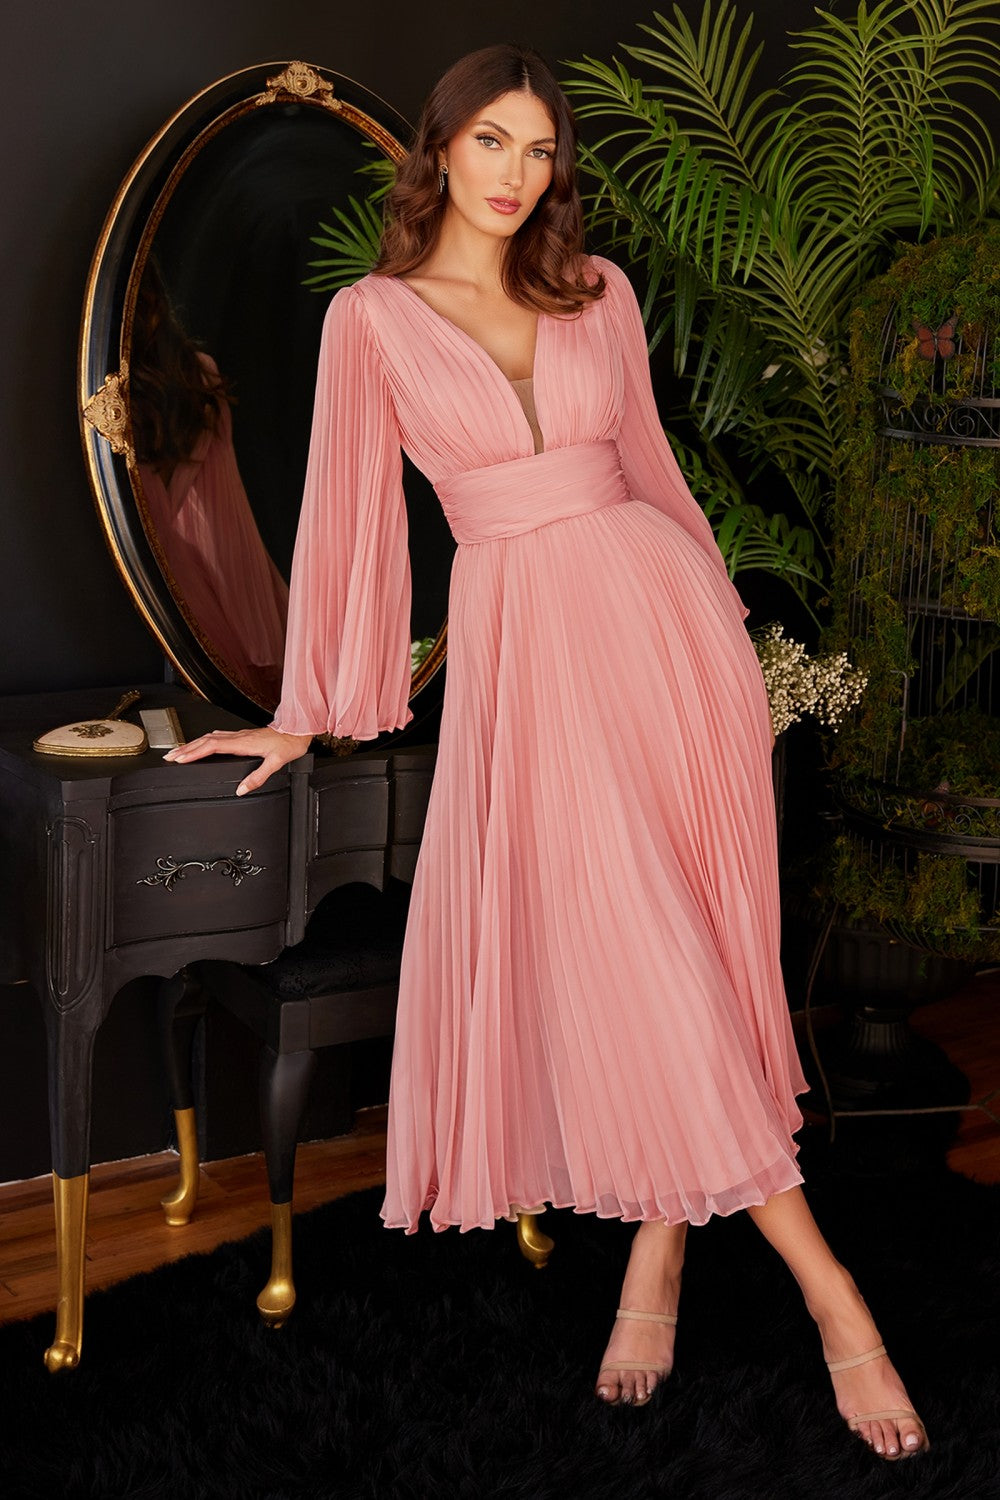 Pleat Chiffon Short Prom & Ball Gown Deep v-neckline Bodice with Open Back and Covered Shoulders Fairy Midi Tea Length Dress CDCD242S Elsy Style Bridesmaid Dress